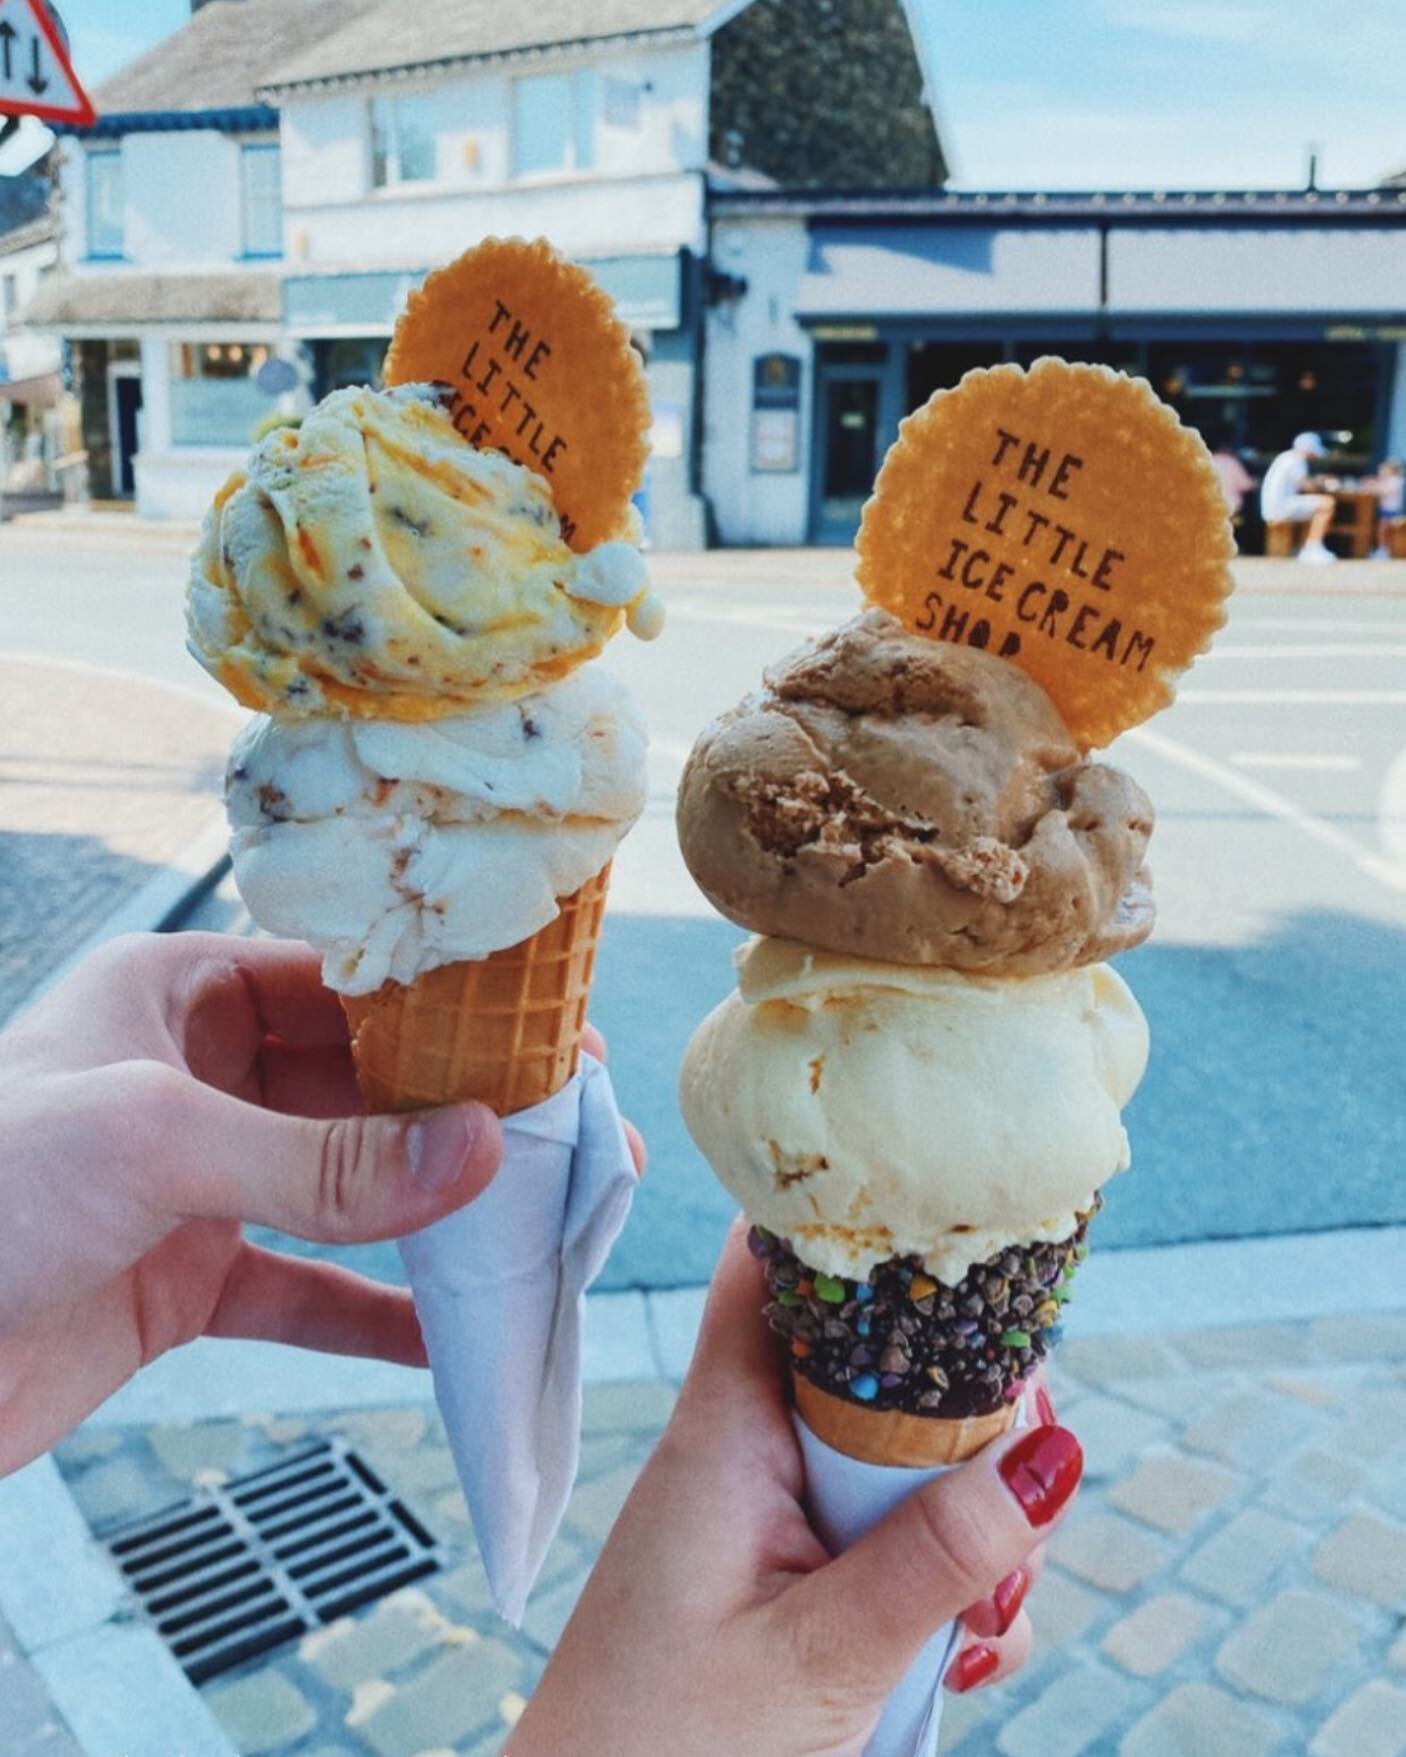 What gloooooooorious weather! ☀️ 

We&rsquo;re open till 5.15 - see you soon for a scoop or two 👀🥰